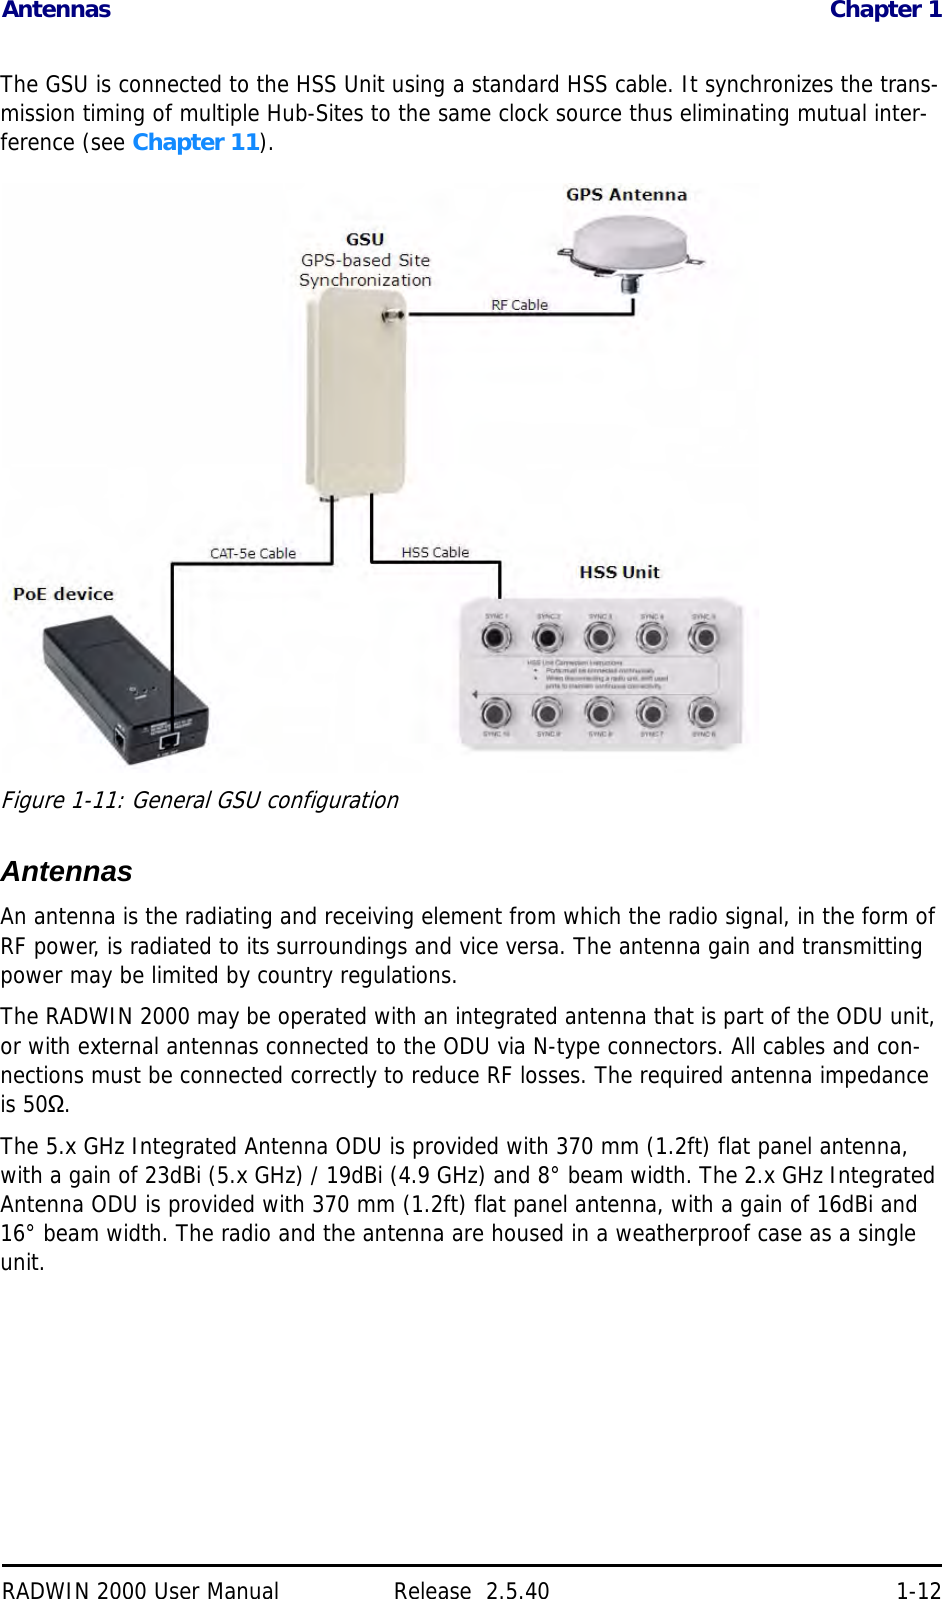 Antennas Chapter 1RADWIN 2000 User Manual Release  2.5.40 1-12The GSU is connected to the HSS Unit using a standard HSS cable. It synchronizes the trans-mission timing of multiple Hub-Sites to the same clock source thus eliminating mutual inter-ference (see Chapter 11).Figure 1-11: General GSU configuration AntennasAn antenna is the radiating and receiving element from which the radio signal, in the form of RF power, is radiated to its surroundings and vice versa. The antenna gain and transmitting power may be limited by country regulations.The RADWIN 2000 may be operated with an integrated antenna that is part of the ODU unit, or with external antennas connected to the ODU via N-type connectors. All cables and con-nections must be connected correctly to reduce RF losses. The required antenna impedance is 50Ω.The 5.x GHz Integrated Antenna ODU is provided with 370 mm (1.2ft) flat panel antenna, with a gain of 23dBi (5.x GHz) / 19dBi (4.9 GHz) and 8° beam width. The 2.x GHz Integrated Antenna ODU is provided with 370 mm (1.2ft) flat panel antenna, with a gain of 16dBi and 16° beam width. The radio and the antenna are housed in a weatherproof case as a single unit.